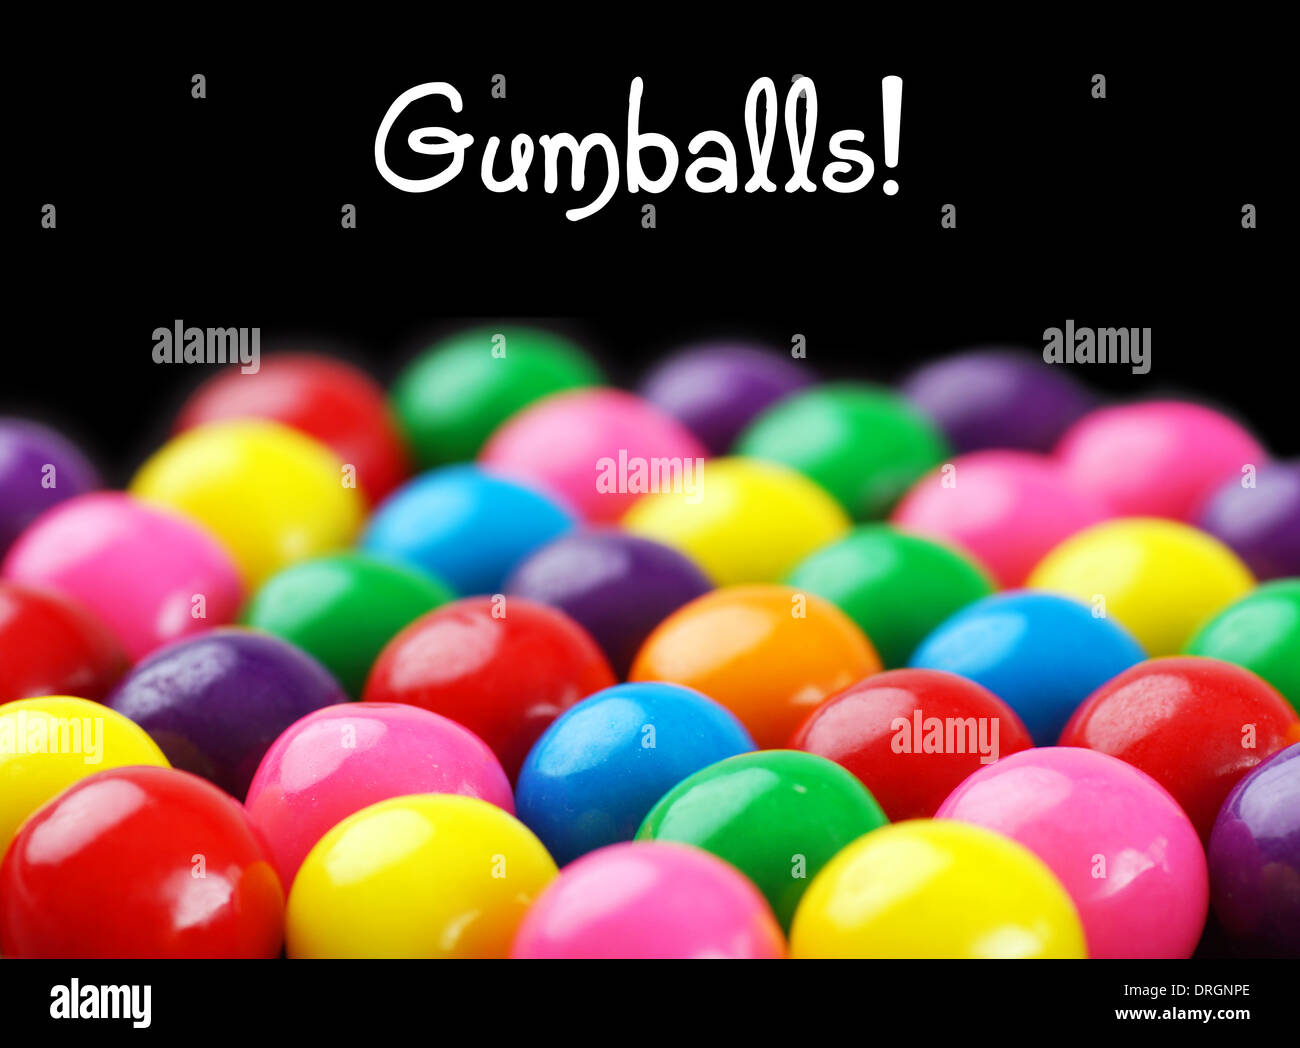 Fun and colorful gumballs on black background with text Stock Photo